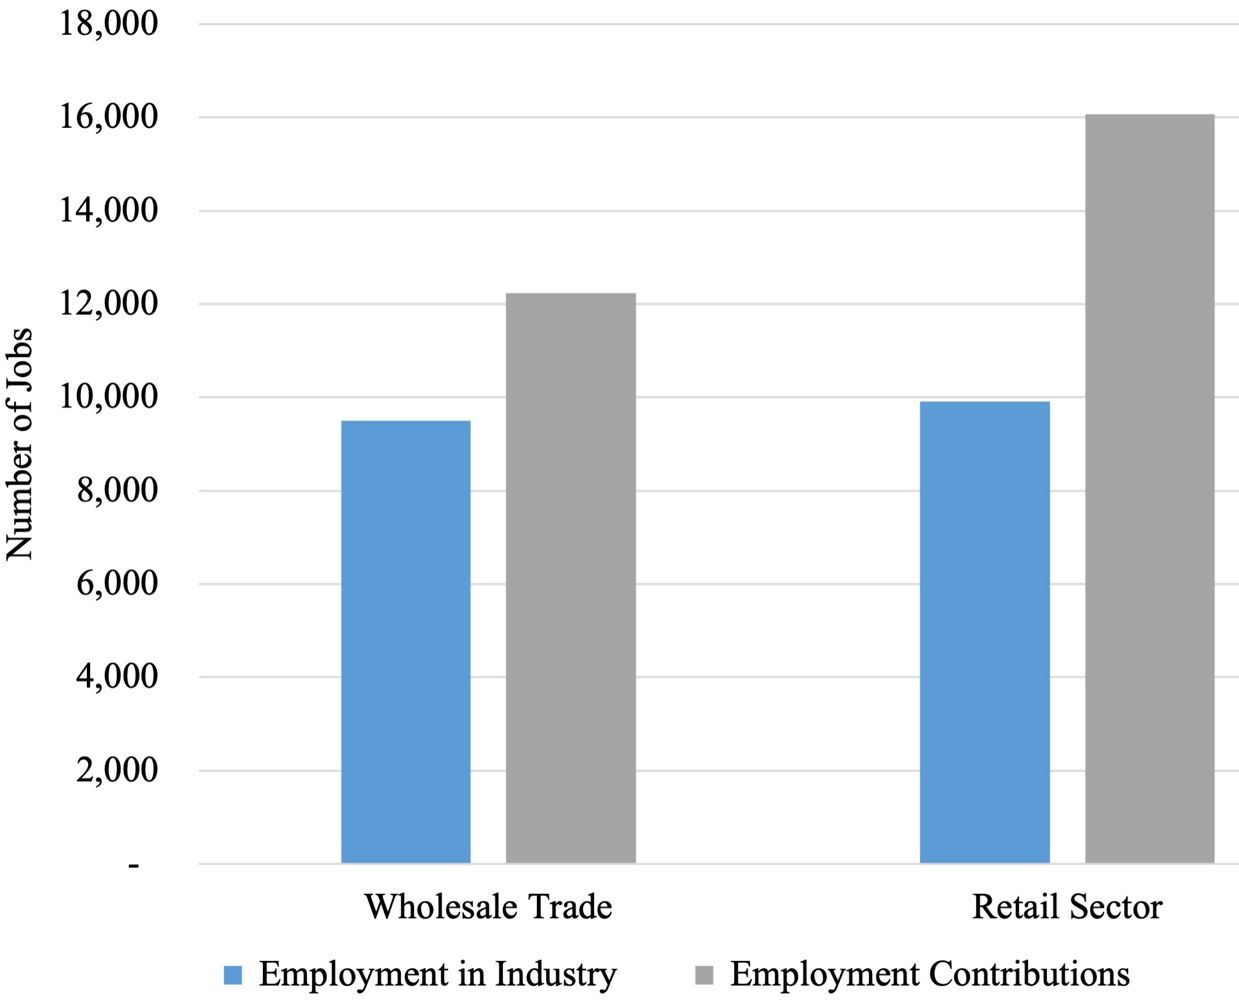 Employment contributions by wholesale and retail firms in 2018. 